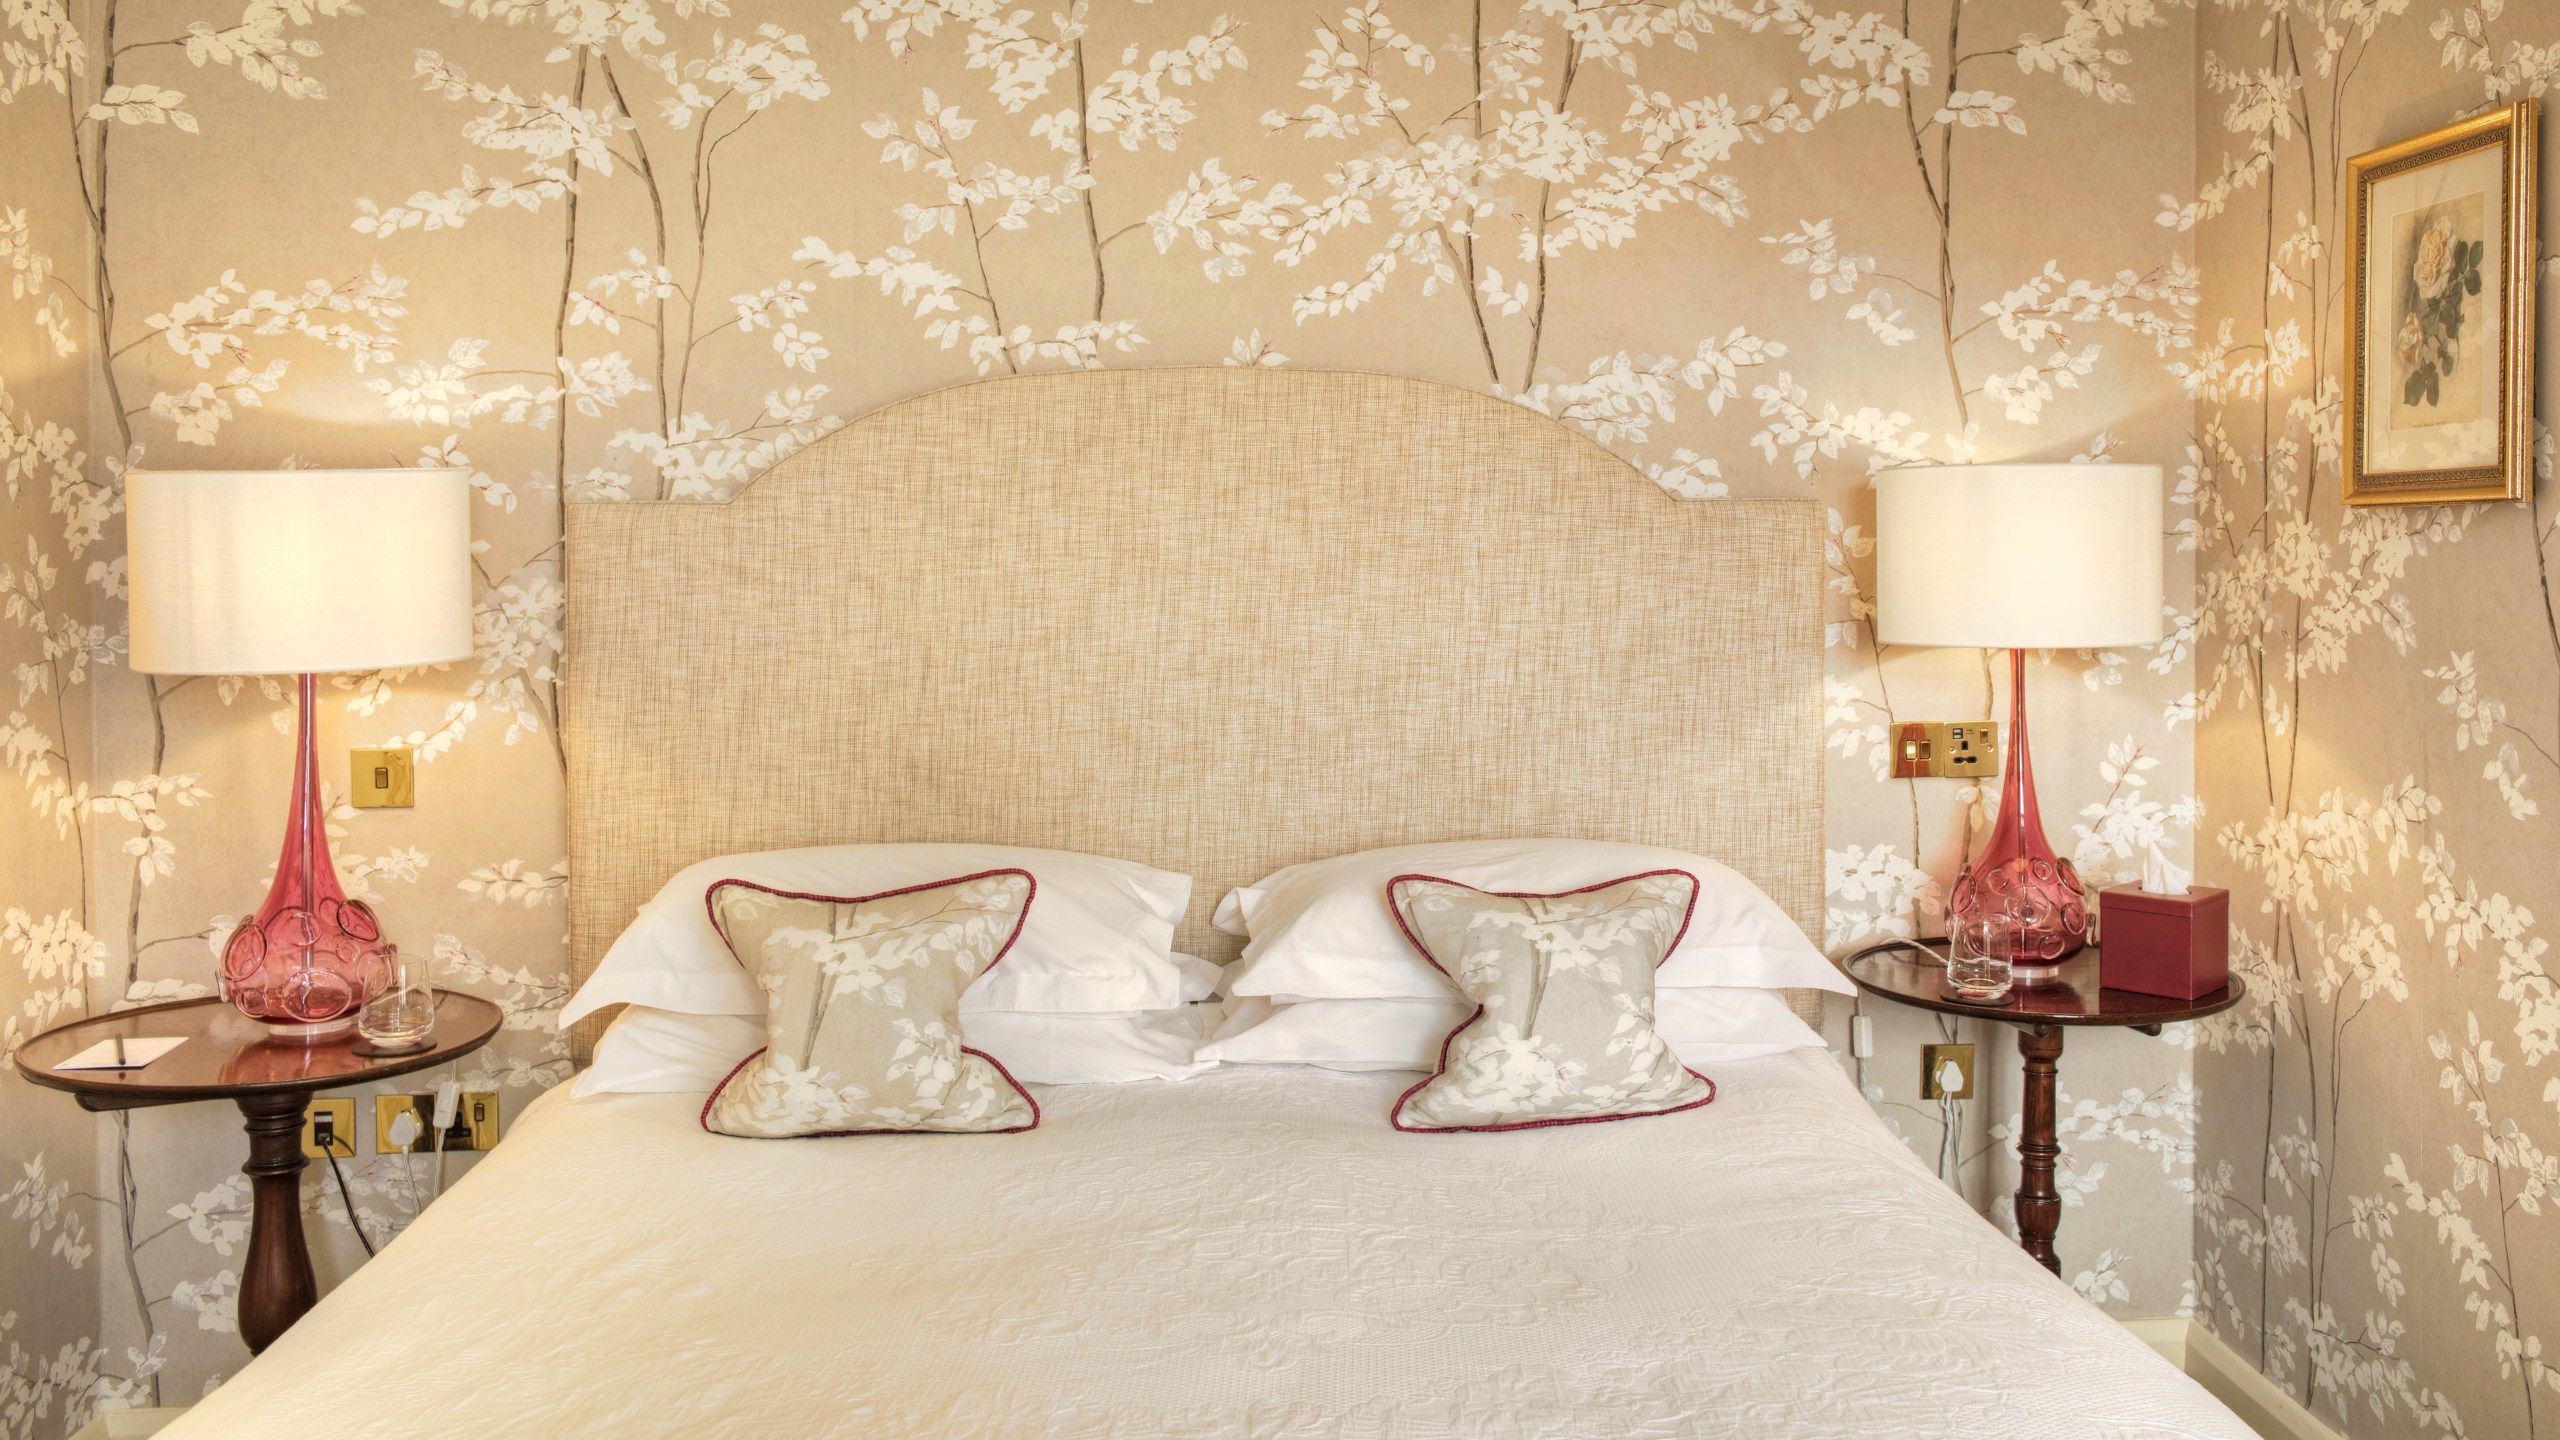 Each of Gravetye’s refined bedrooms look out over the gardens